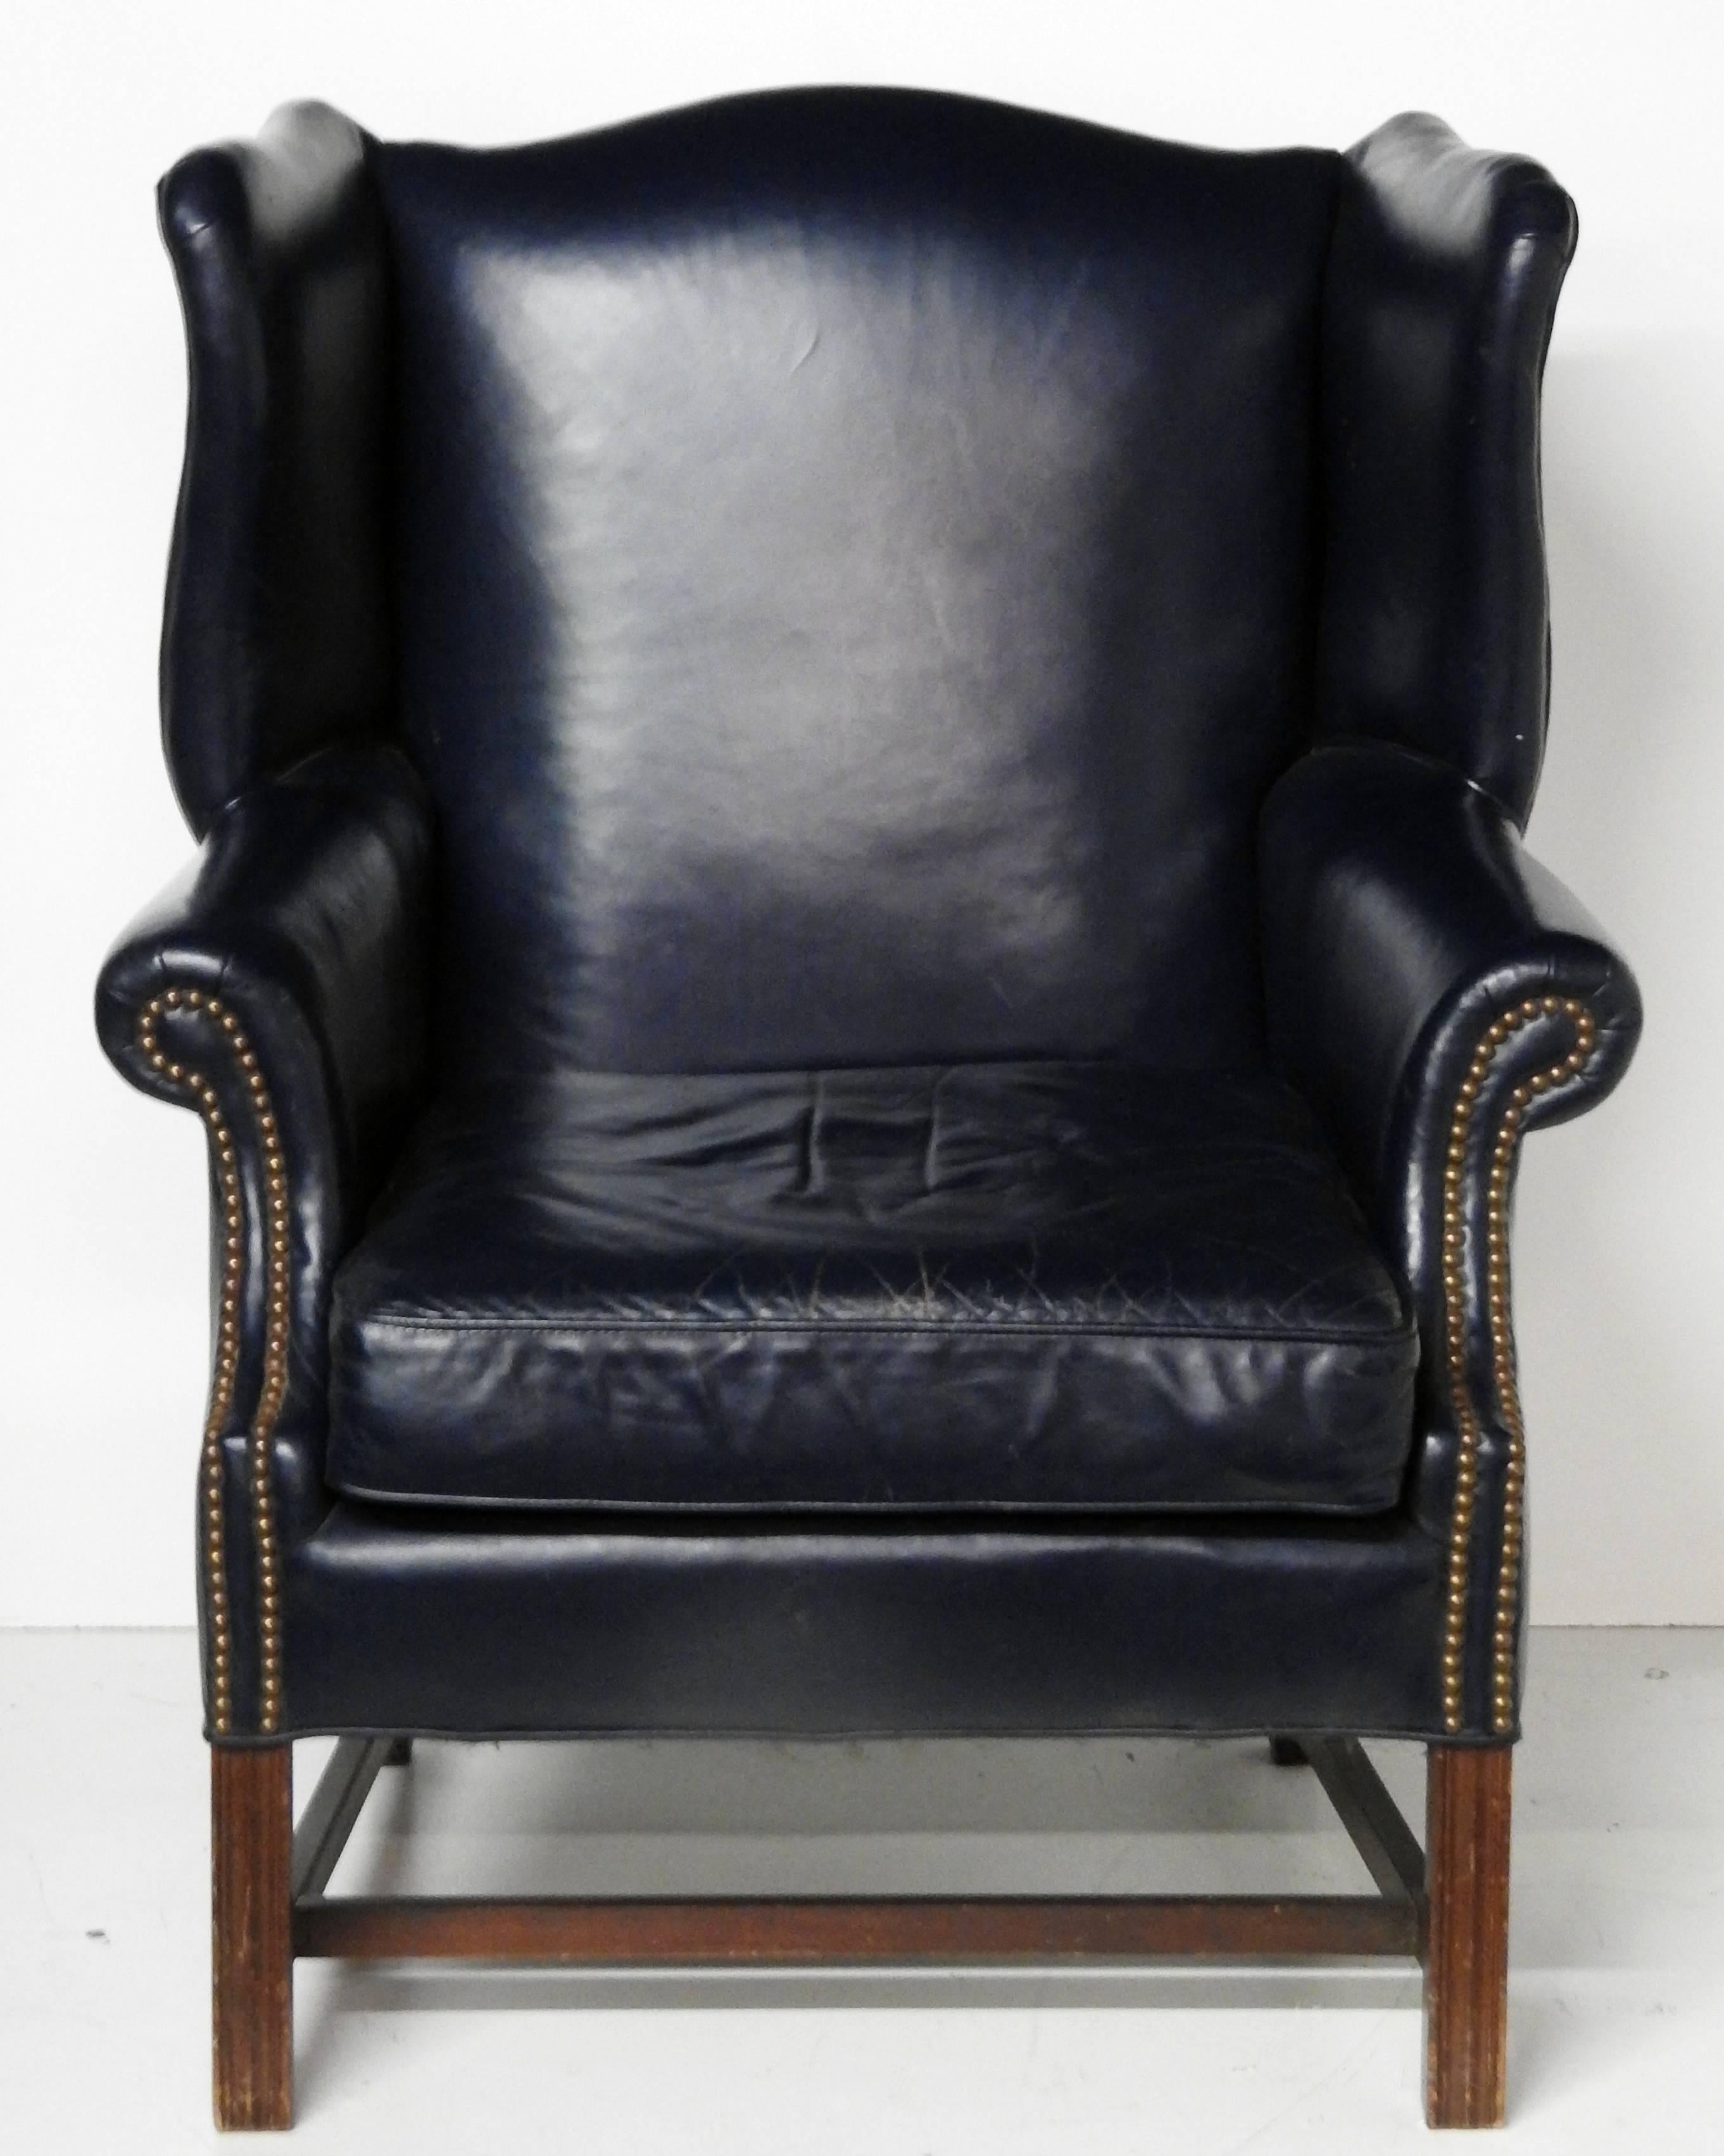 Georgian style wing chair with distressed leather upholstery and nailhead trim by Leathercraft.